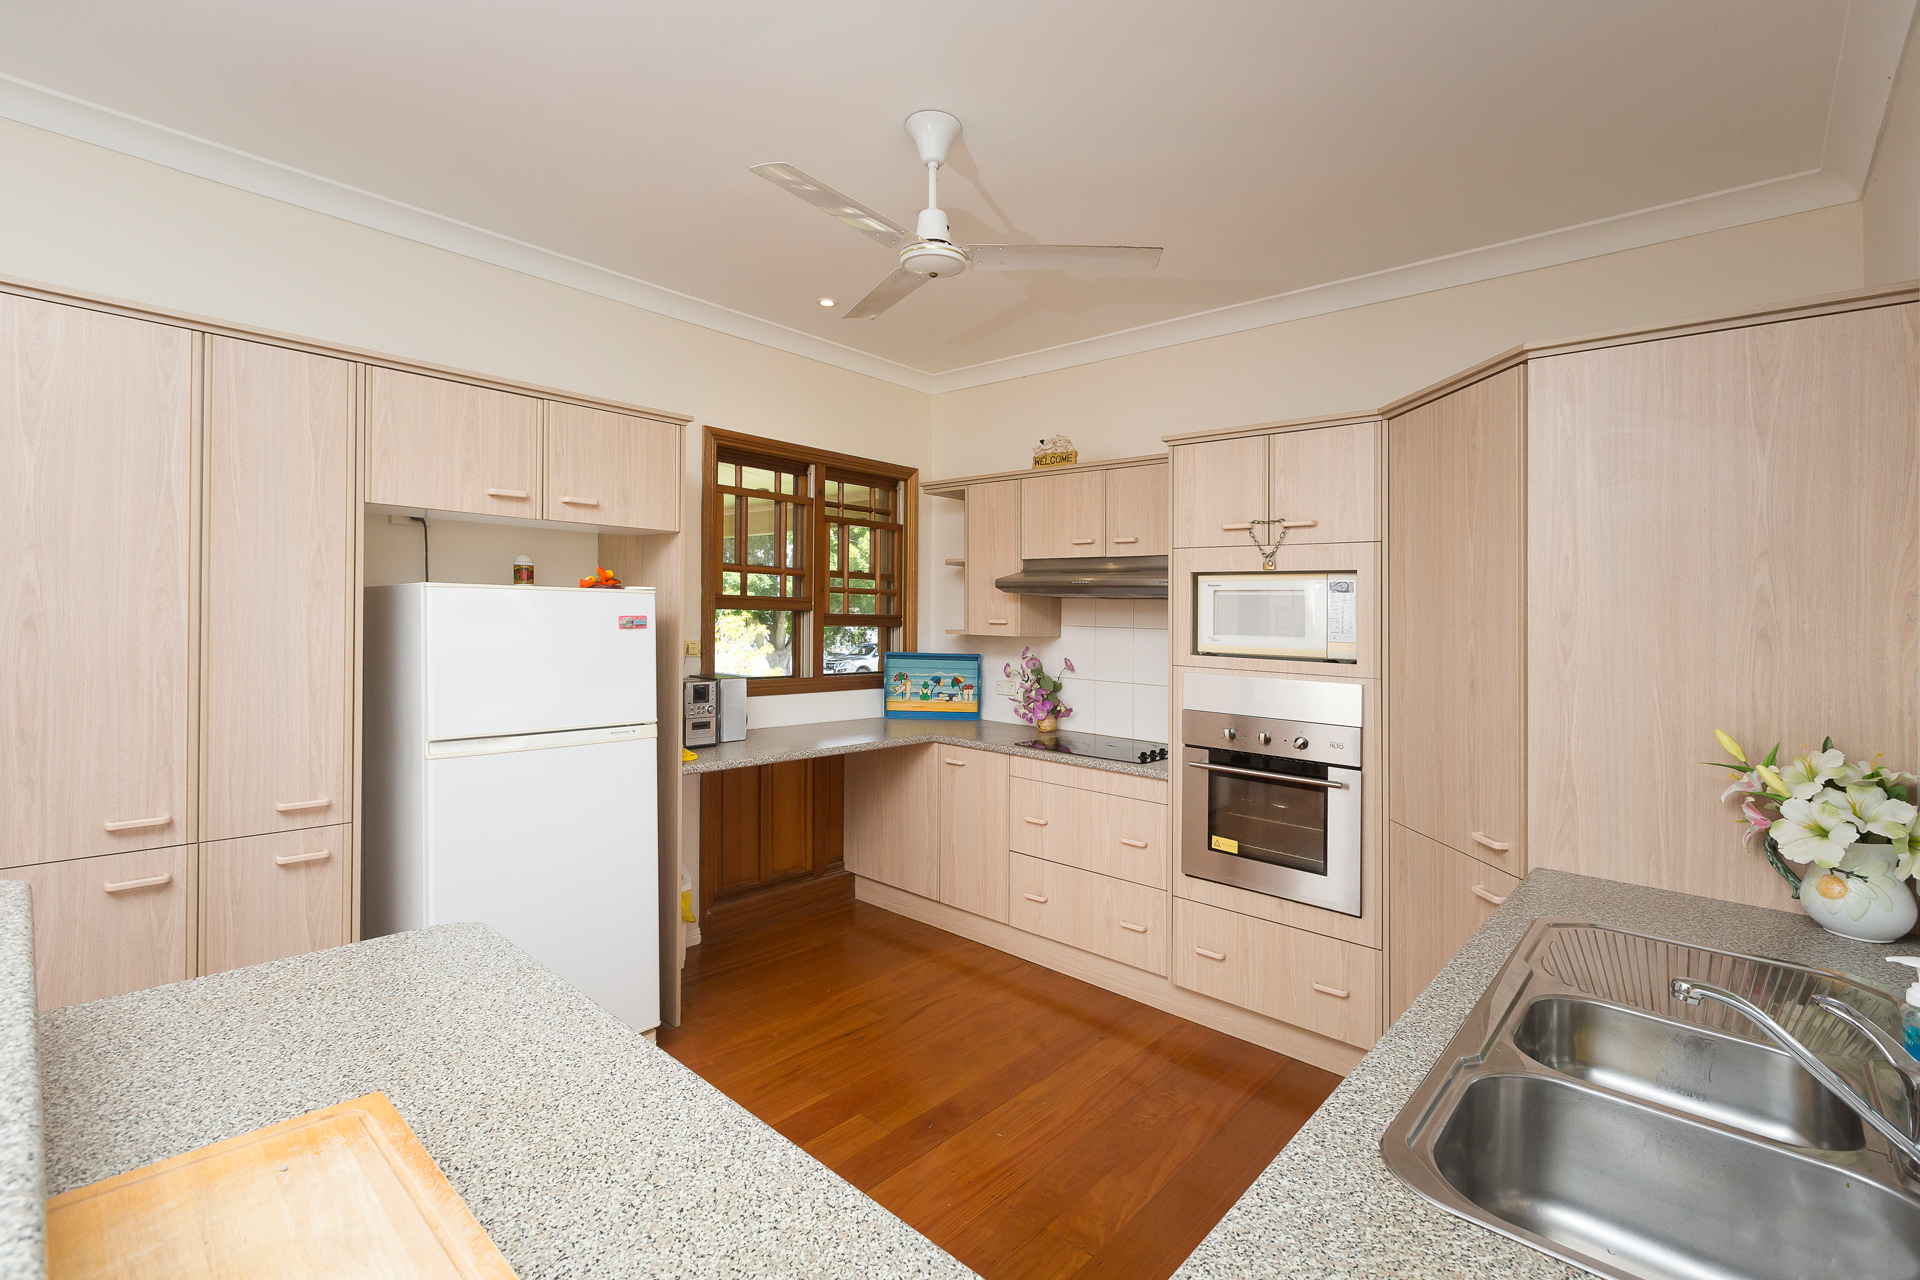 Cranford Waterfront Cottage - Coogee Beach Accommodation 4